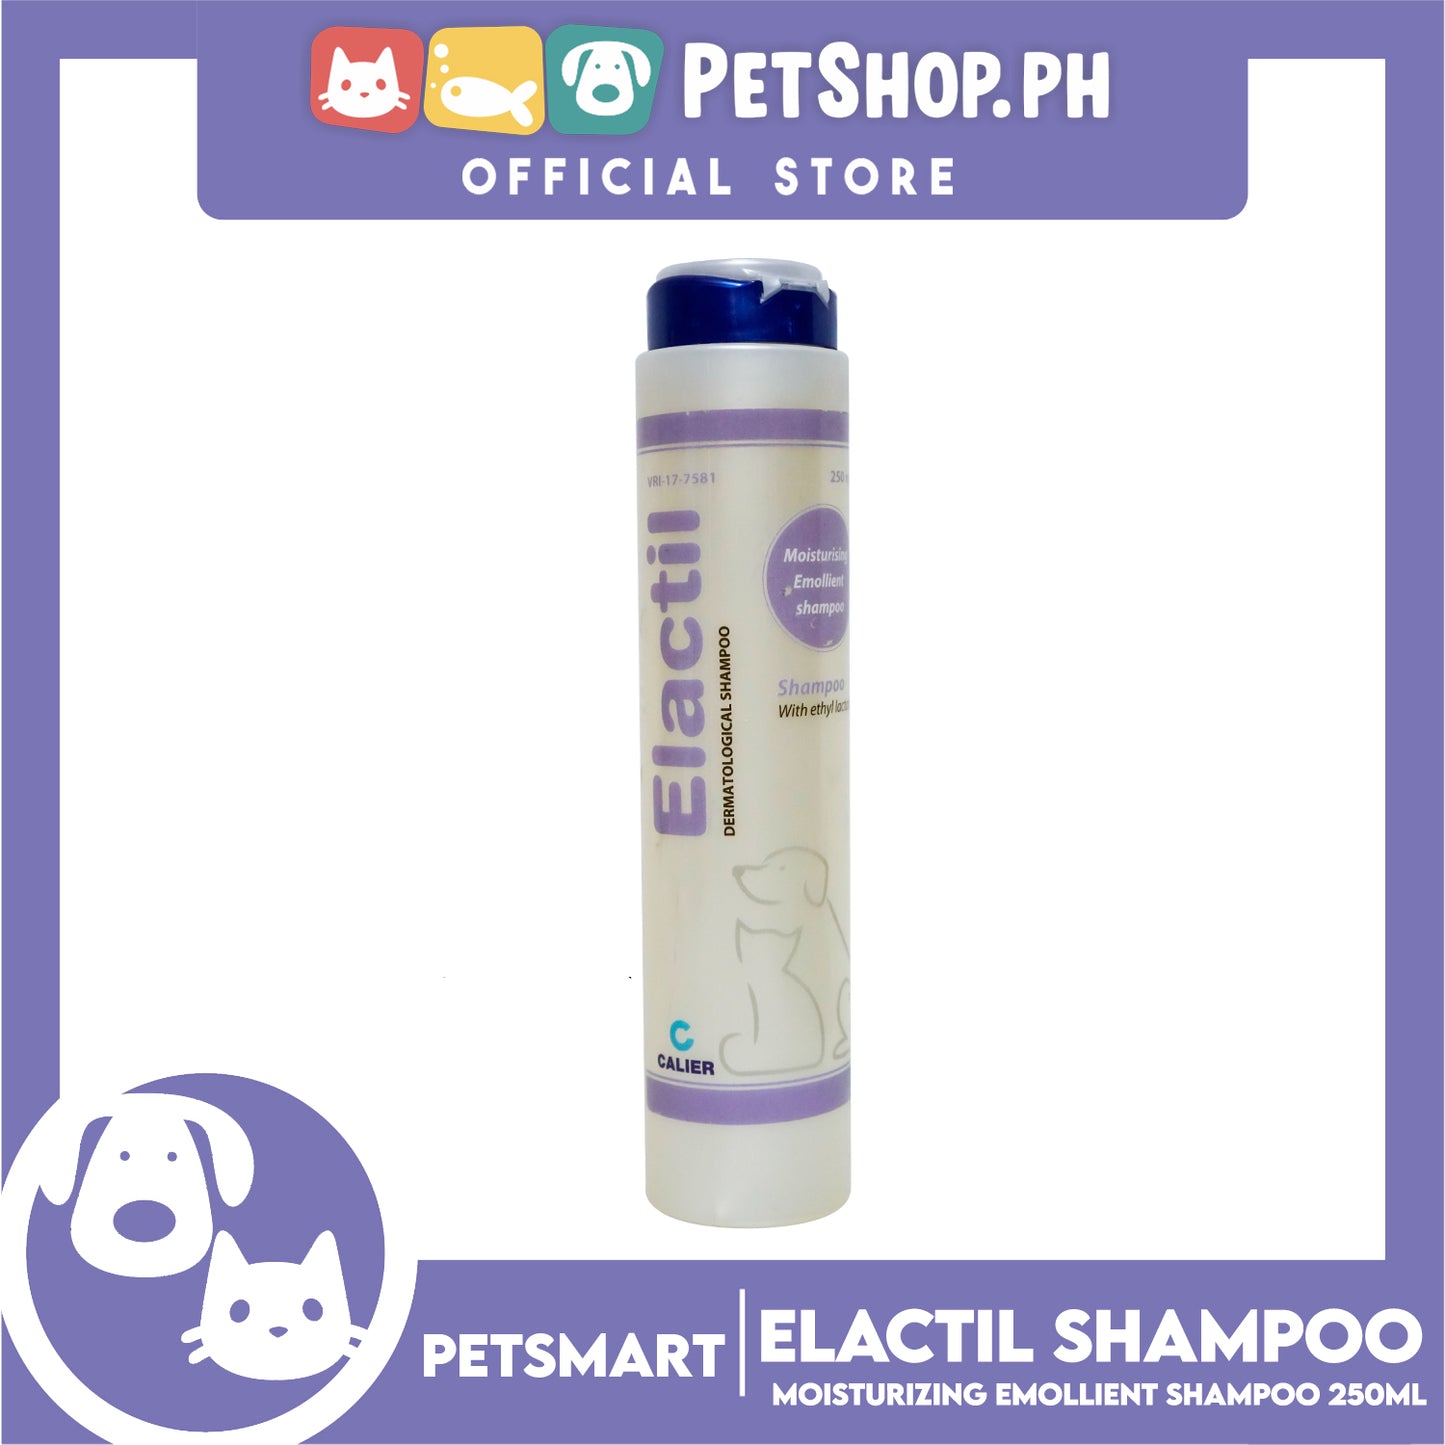 Kawu Elactil Dermatological Shampoo with Ethyl Lactate 250ml For Dogs and Cats